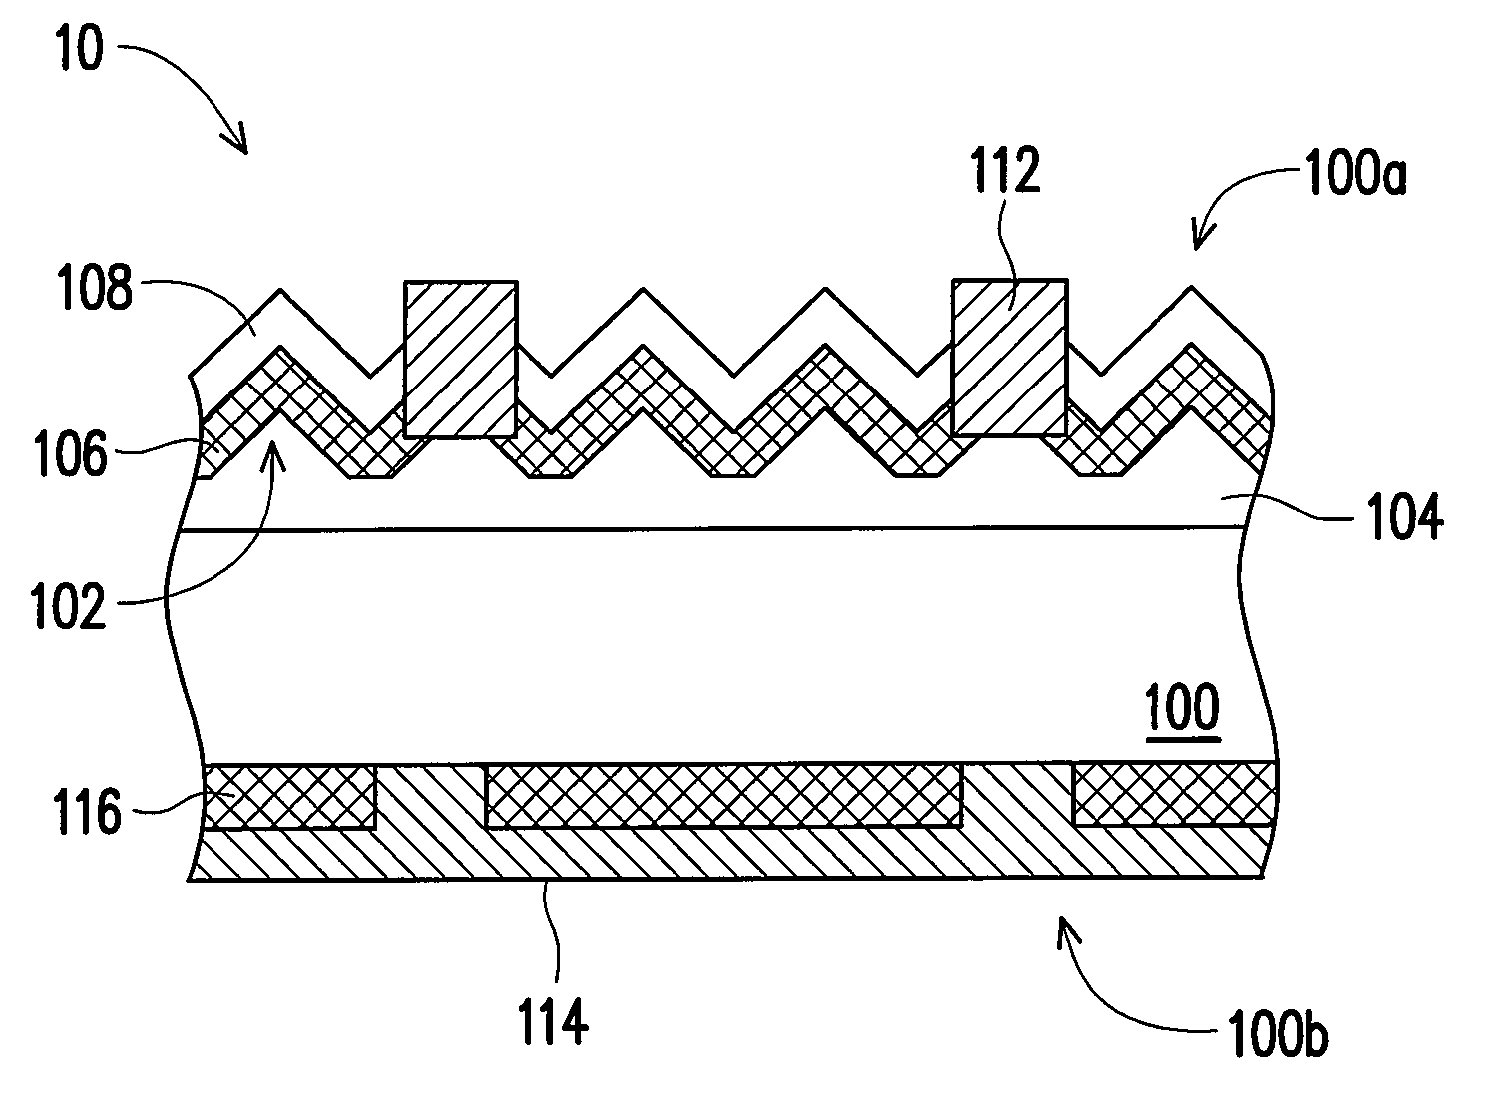 Method of fast hydrogen passivation to solar cells made of crystalline silicon